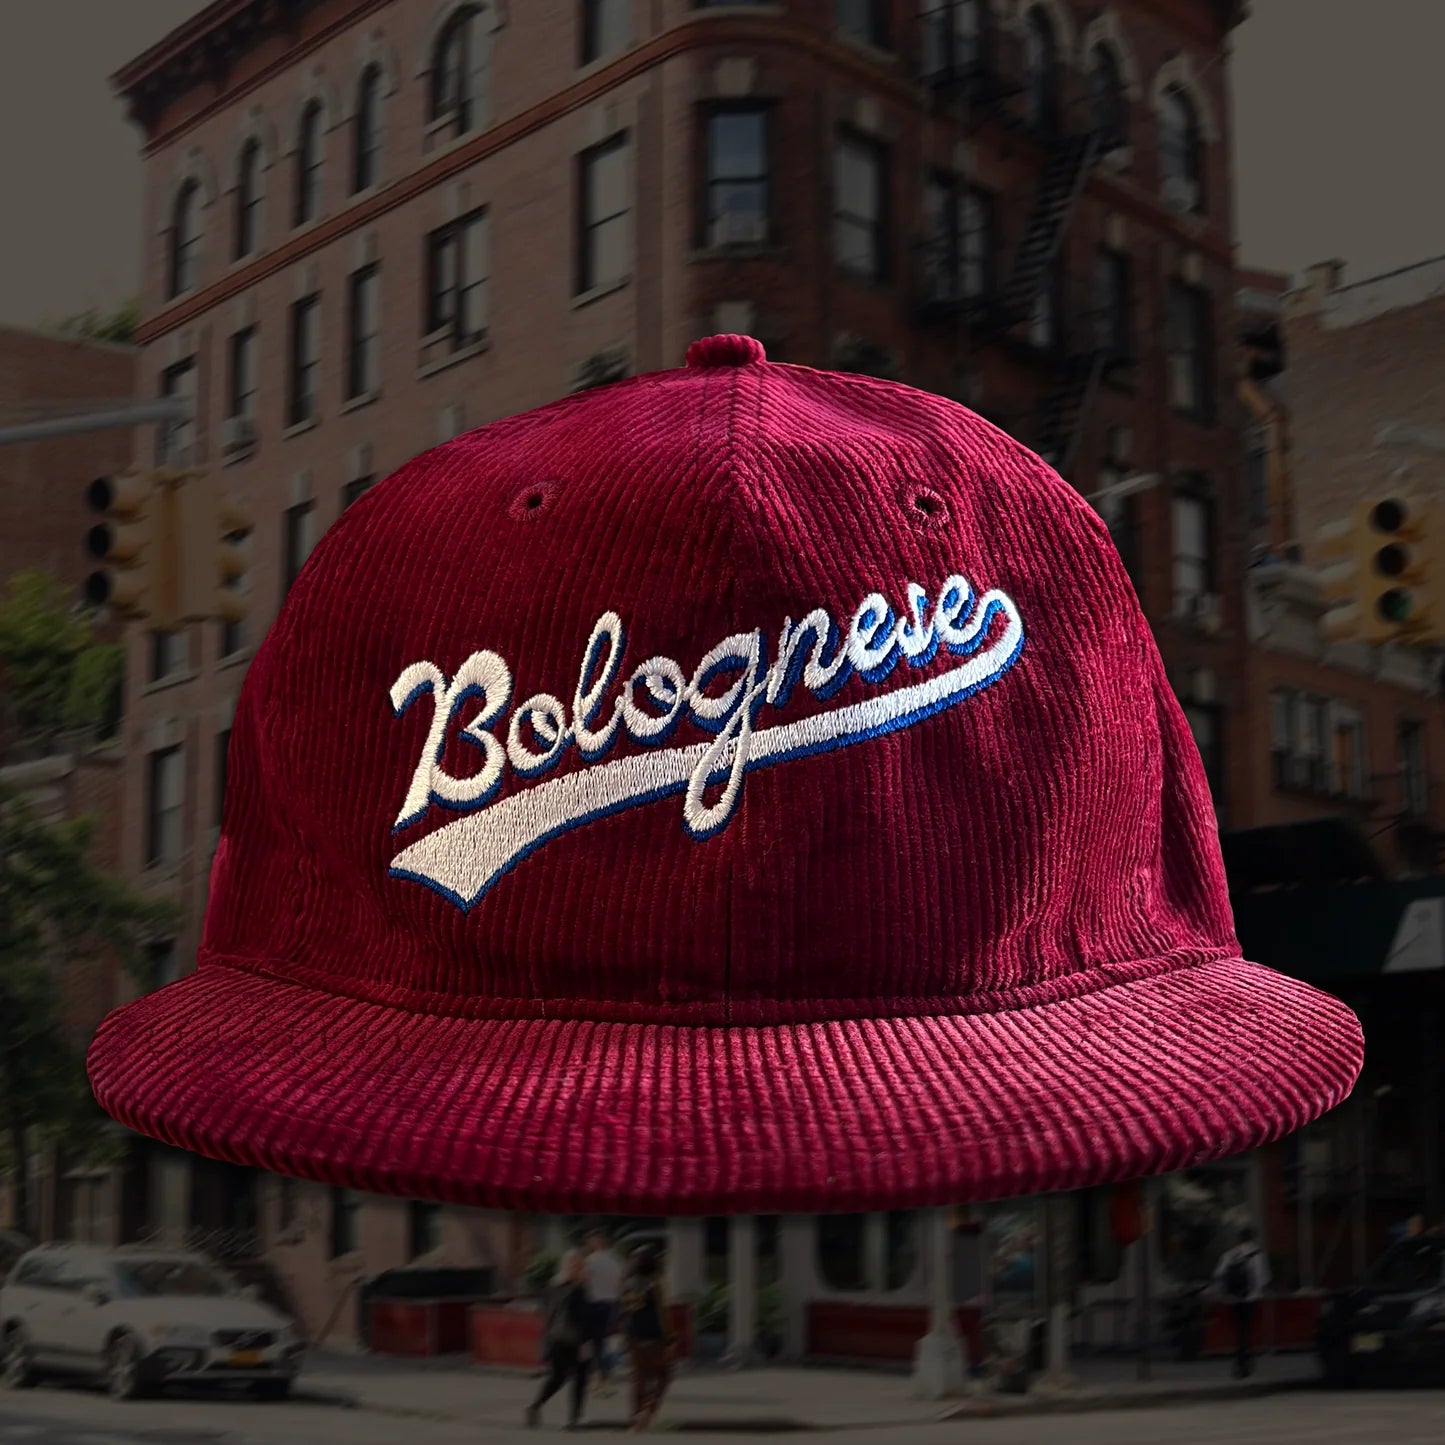 maroon corduroy cap that has "Bolognese" embroidered on the front 